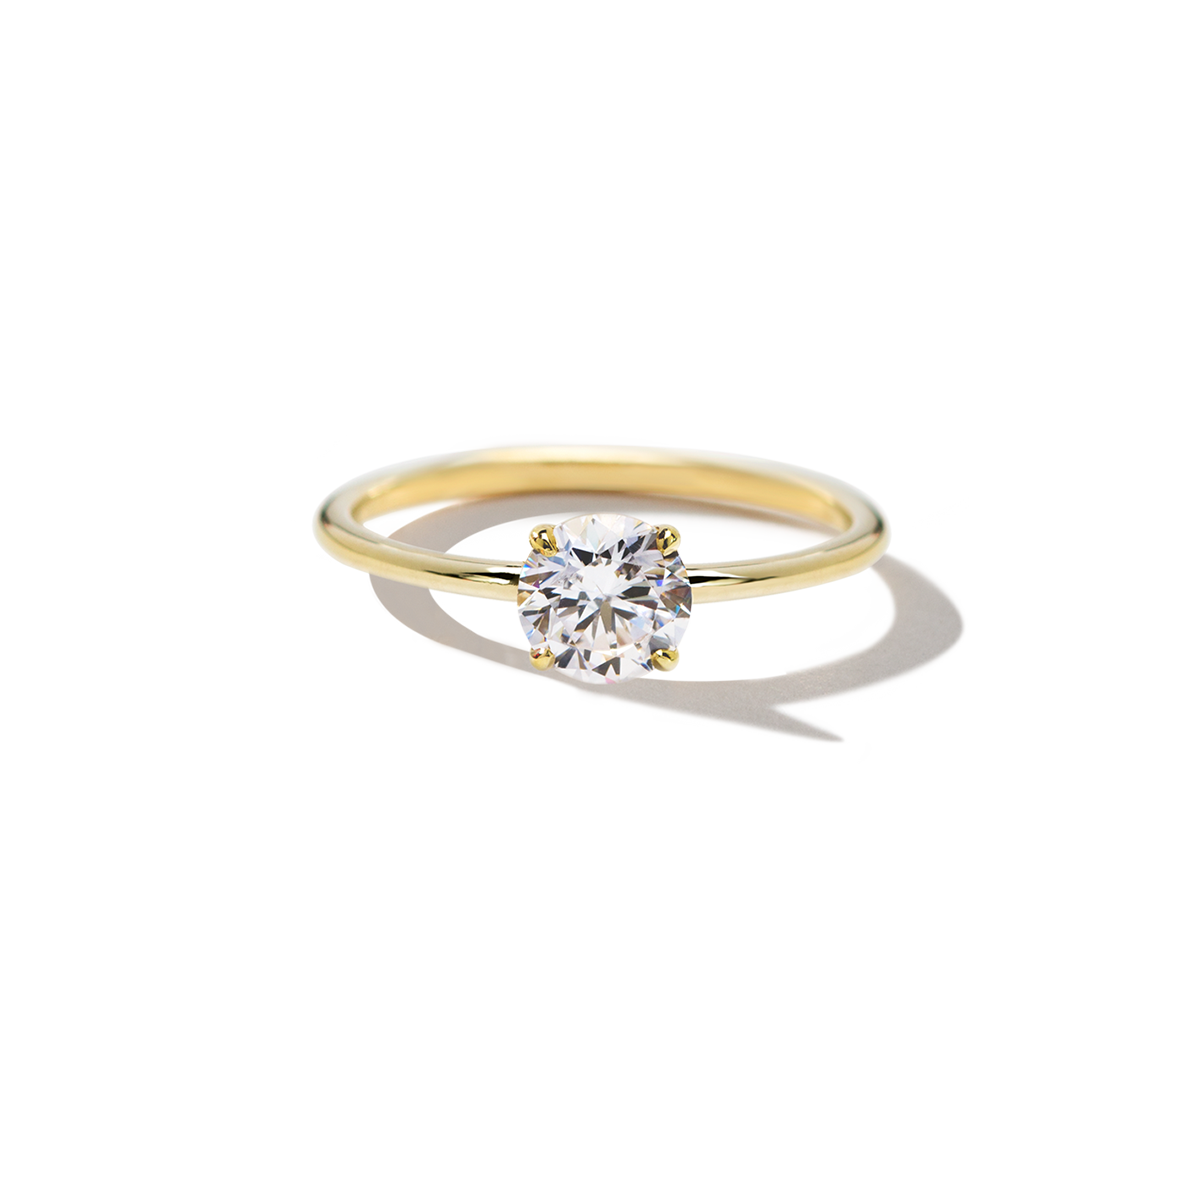 ILA 18K Yellow Gold Round Hidden Halo Pave Engagement Ring